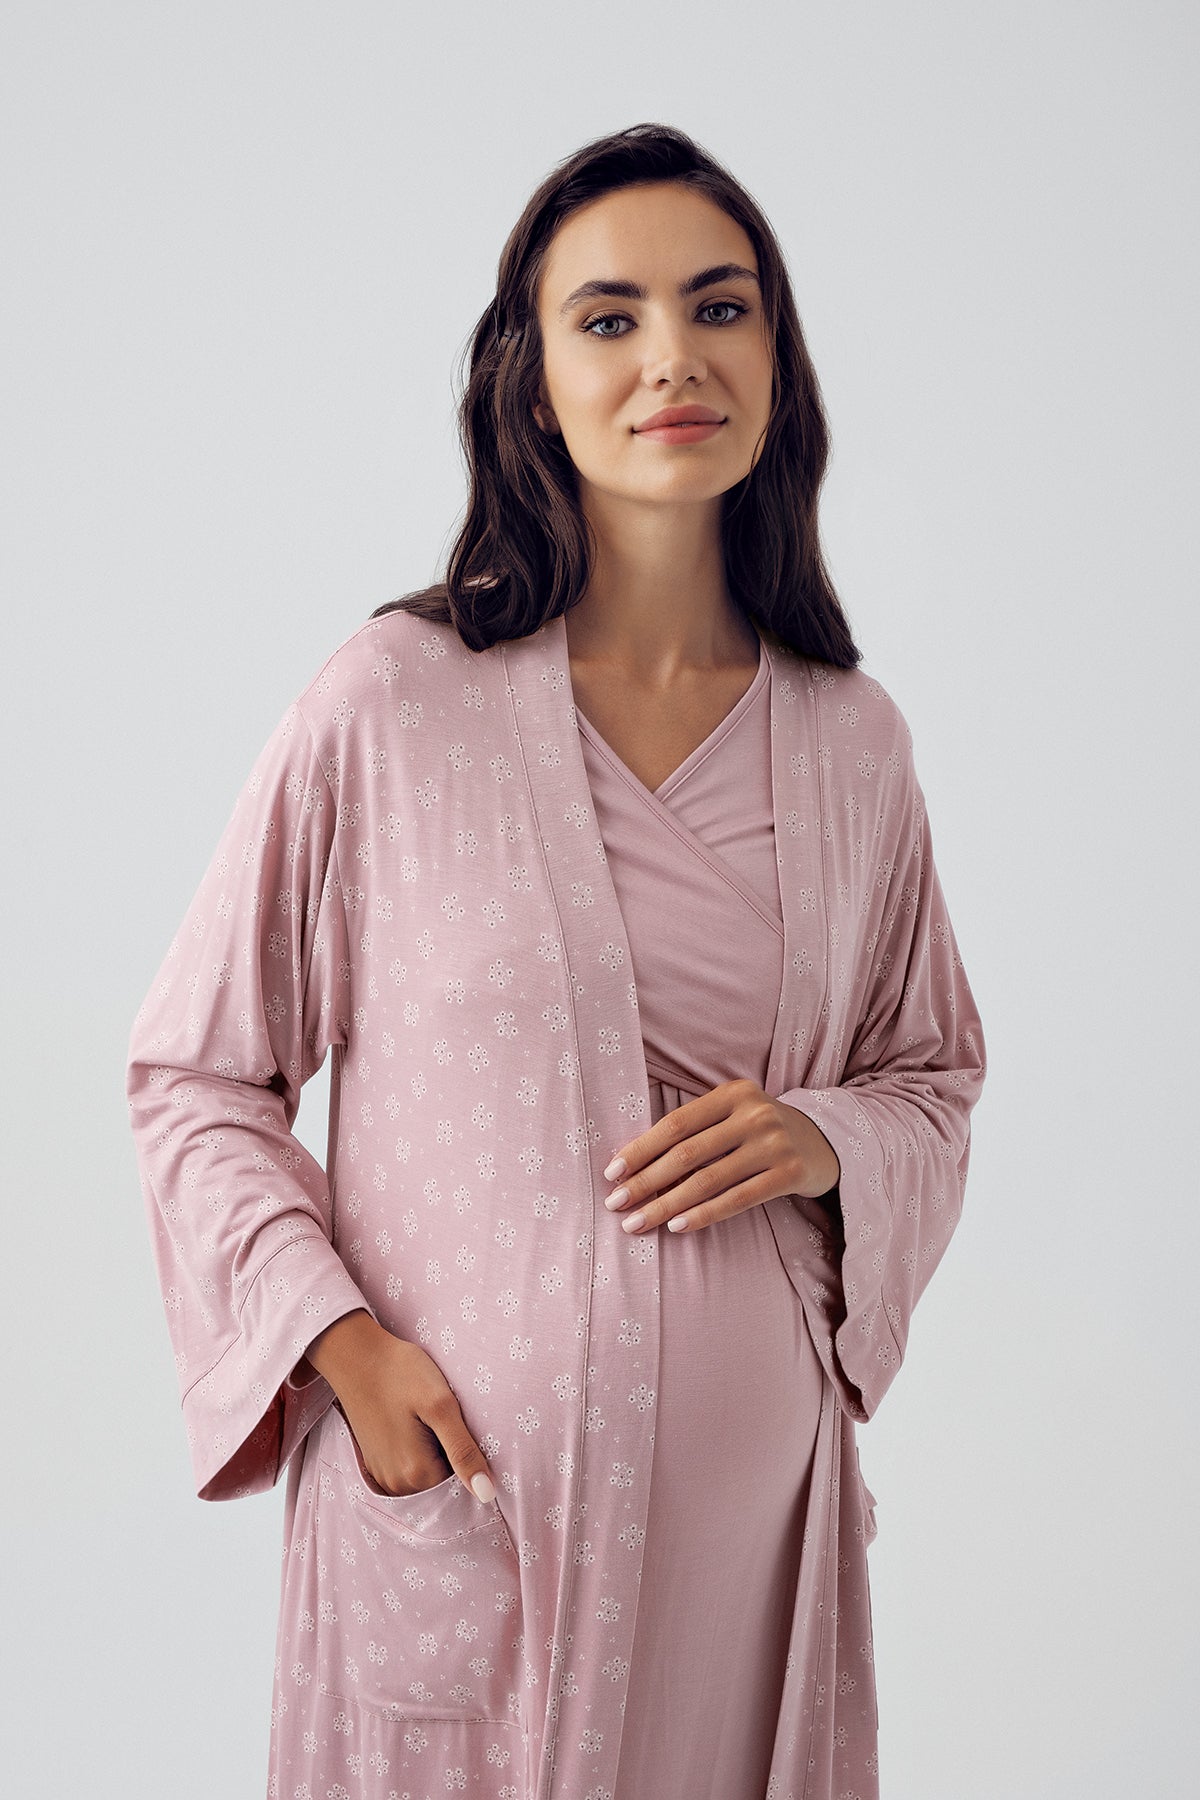 Shopymommy 15405 Cross Double Breasted Maternity & Nursing Nightgown With Patterned Robe Powder